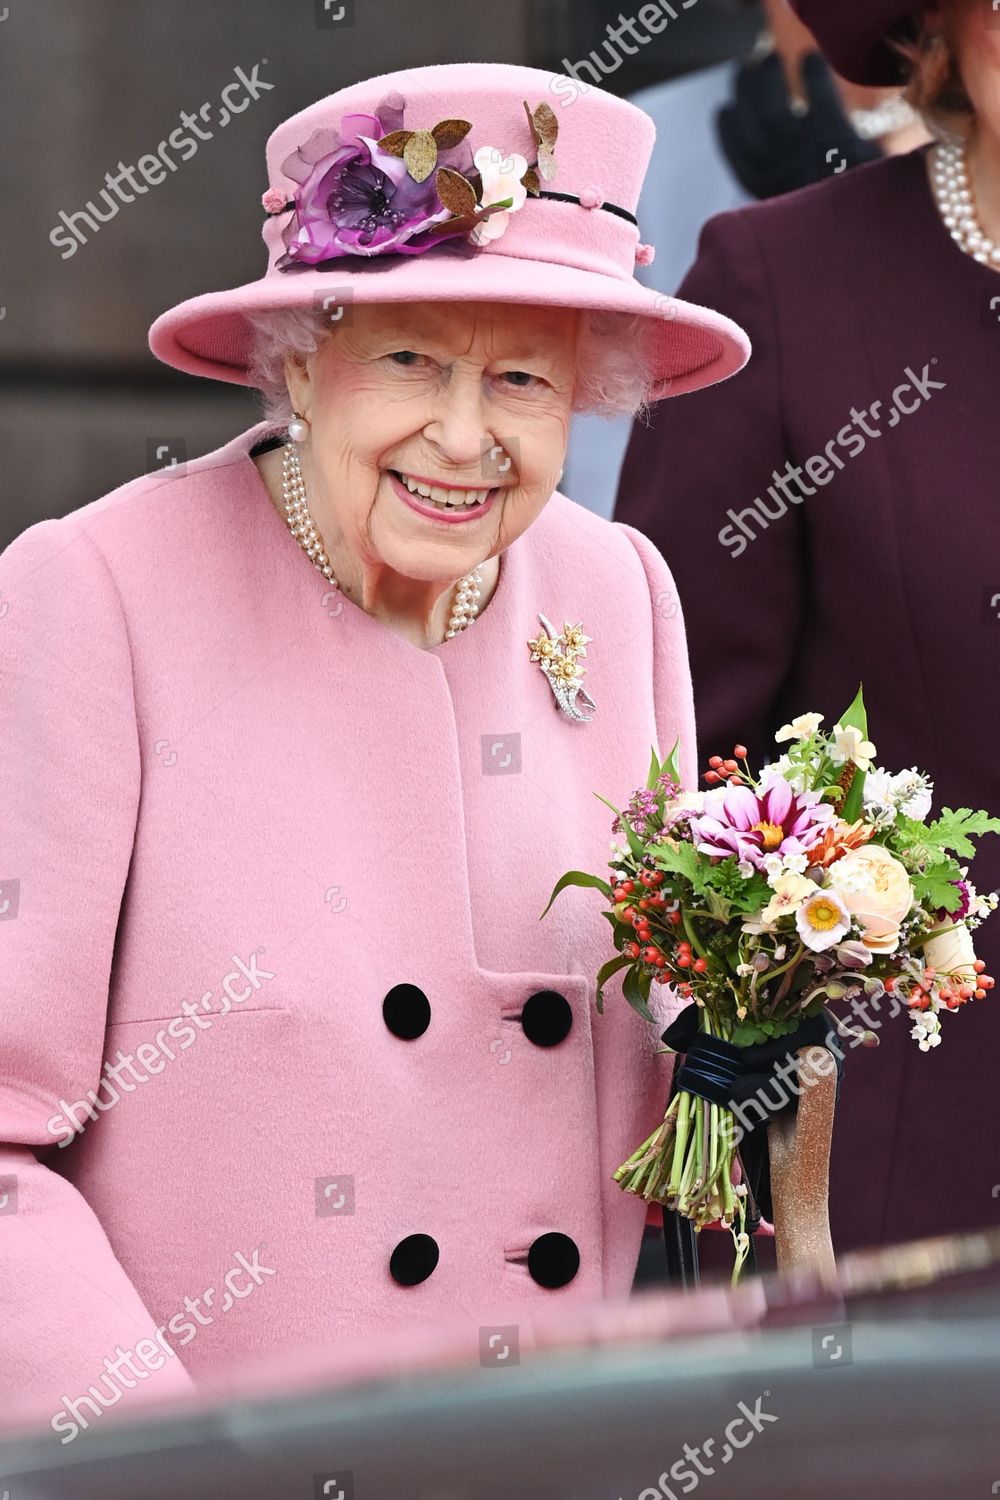 opening-ceremony-of-the-sixth-session-of-the-senedd-cardiff-wales-uk-shutterstock-editorial-12536982bz.jpg